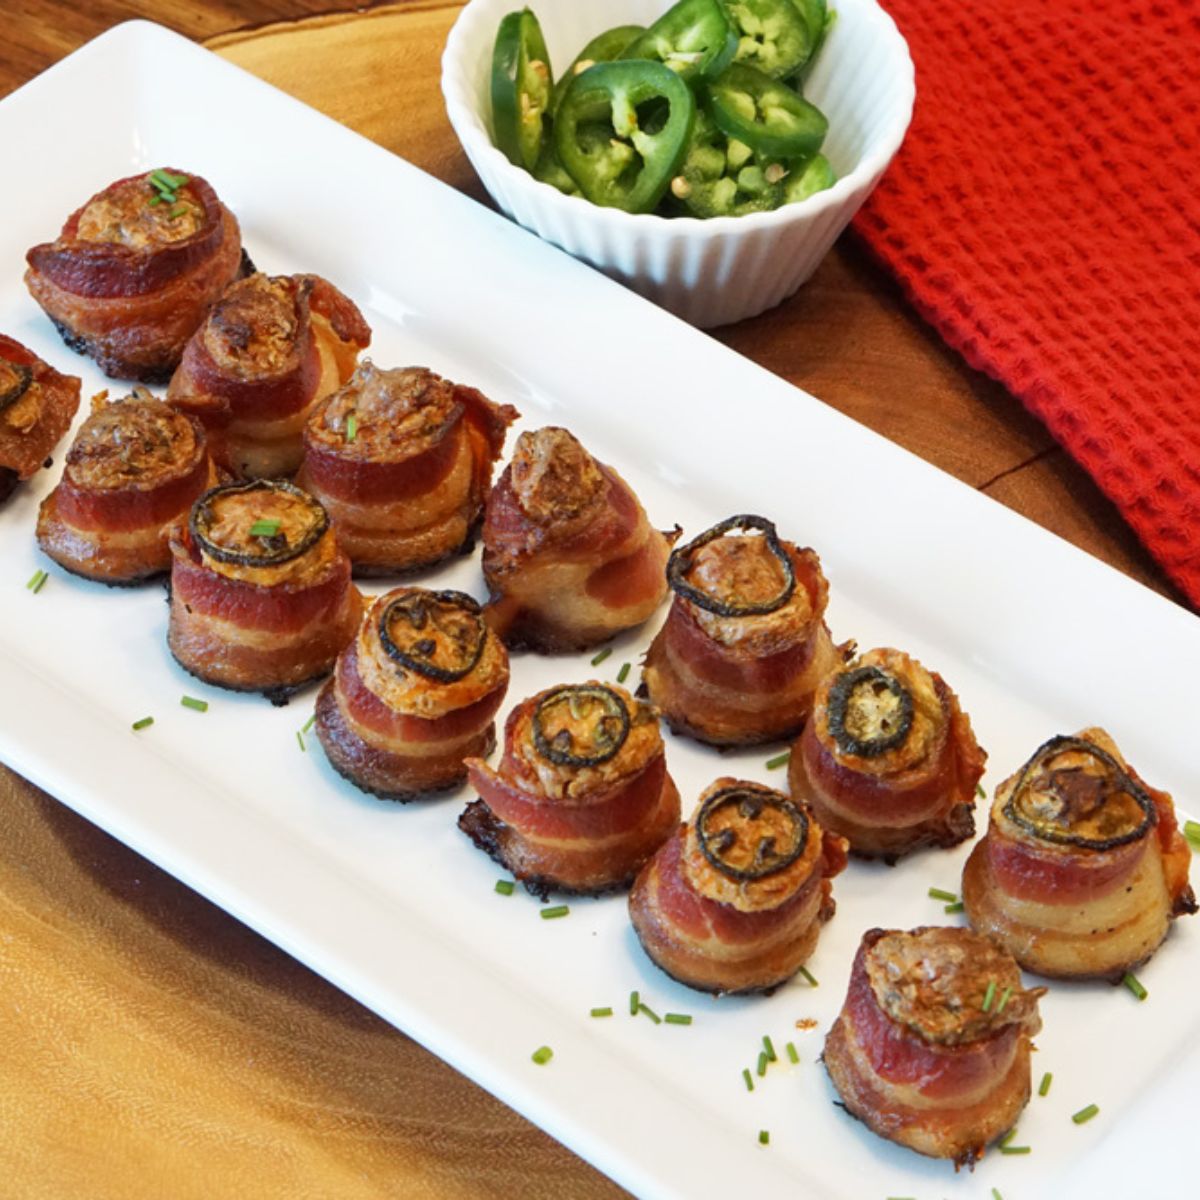 Baked Pig Shots (Bacon Wrapped Sausage) - Savored Sips